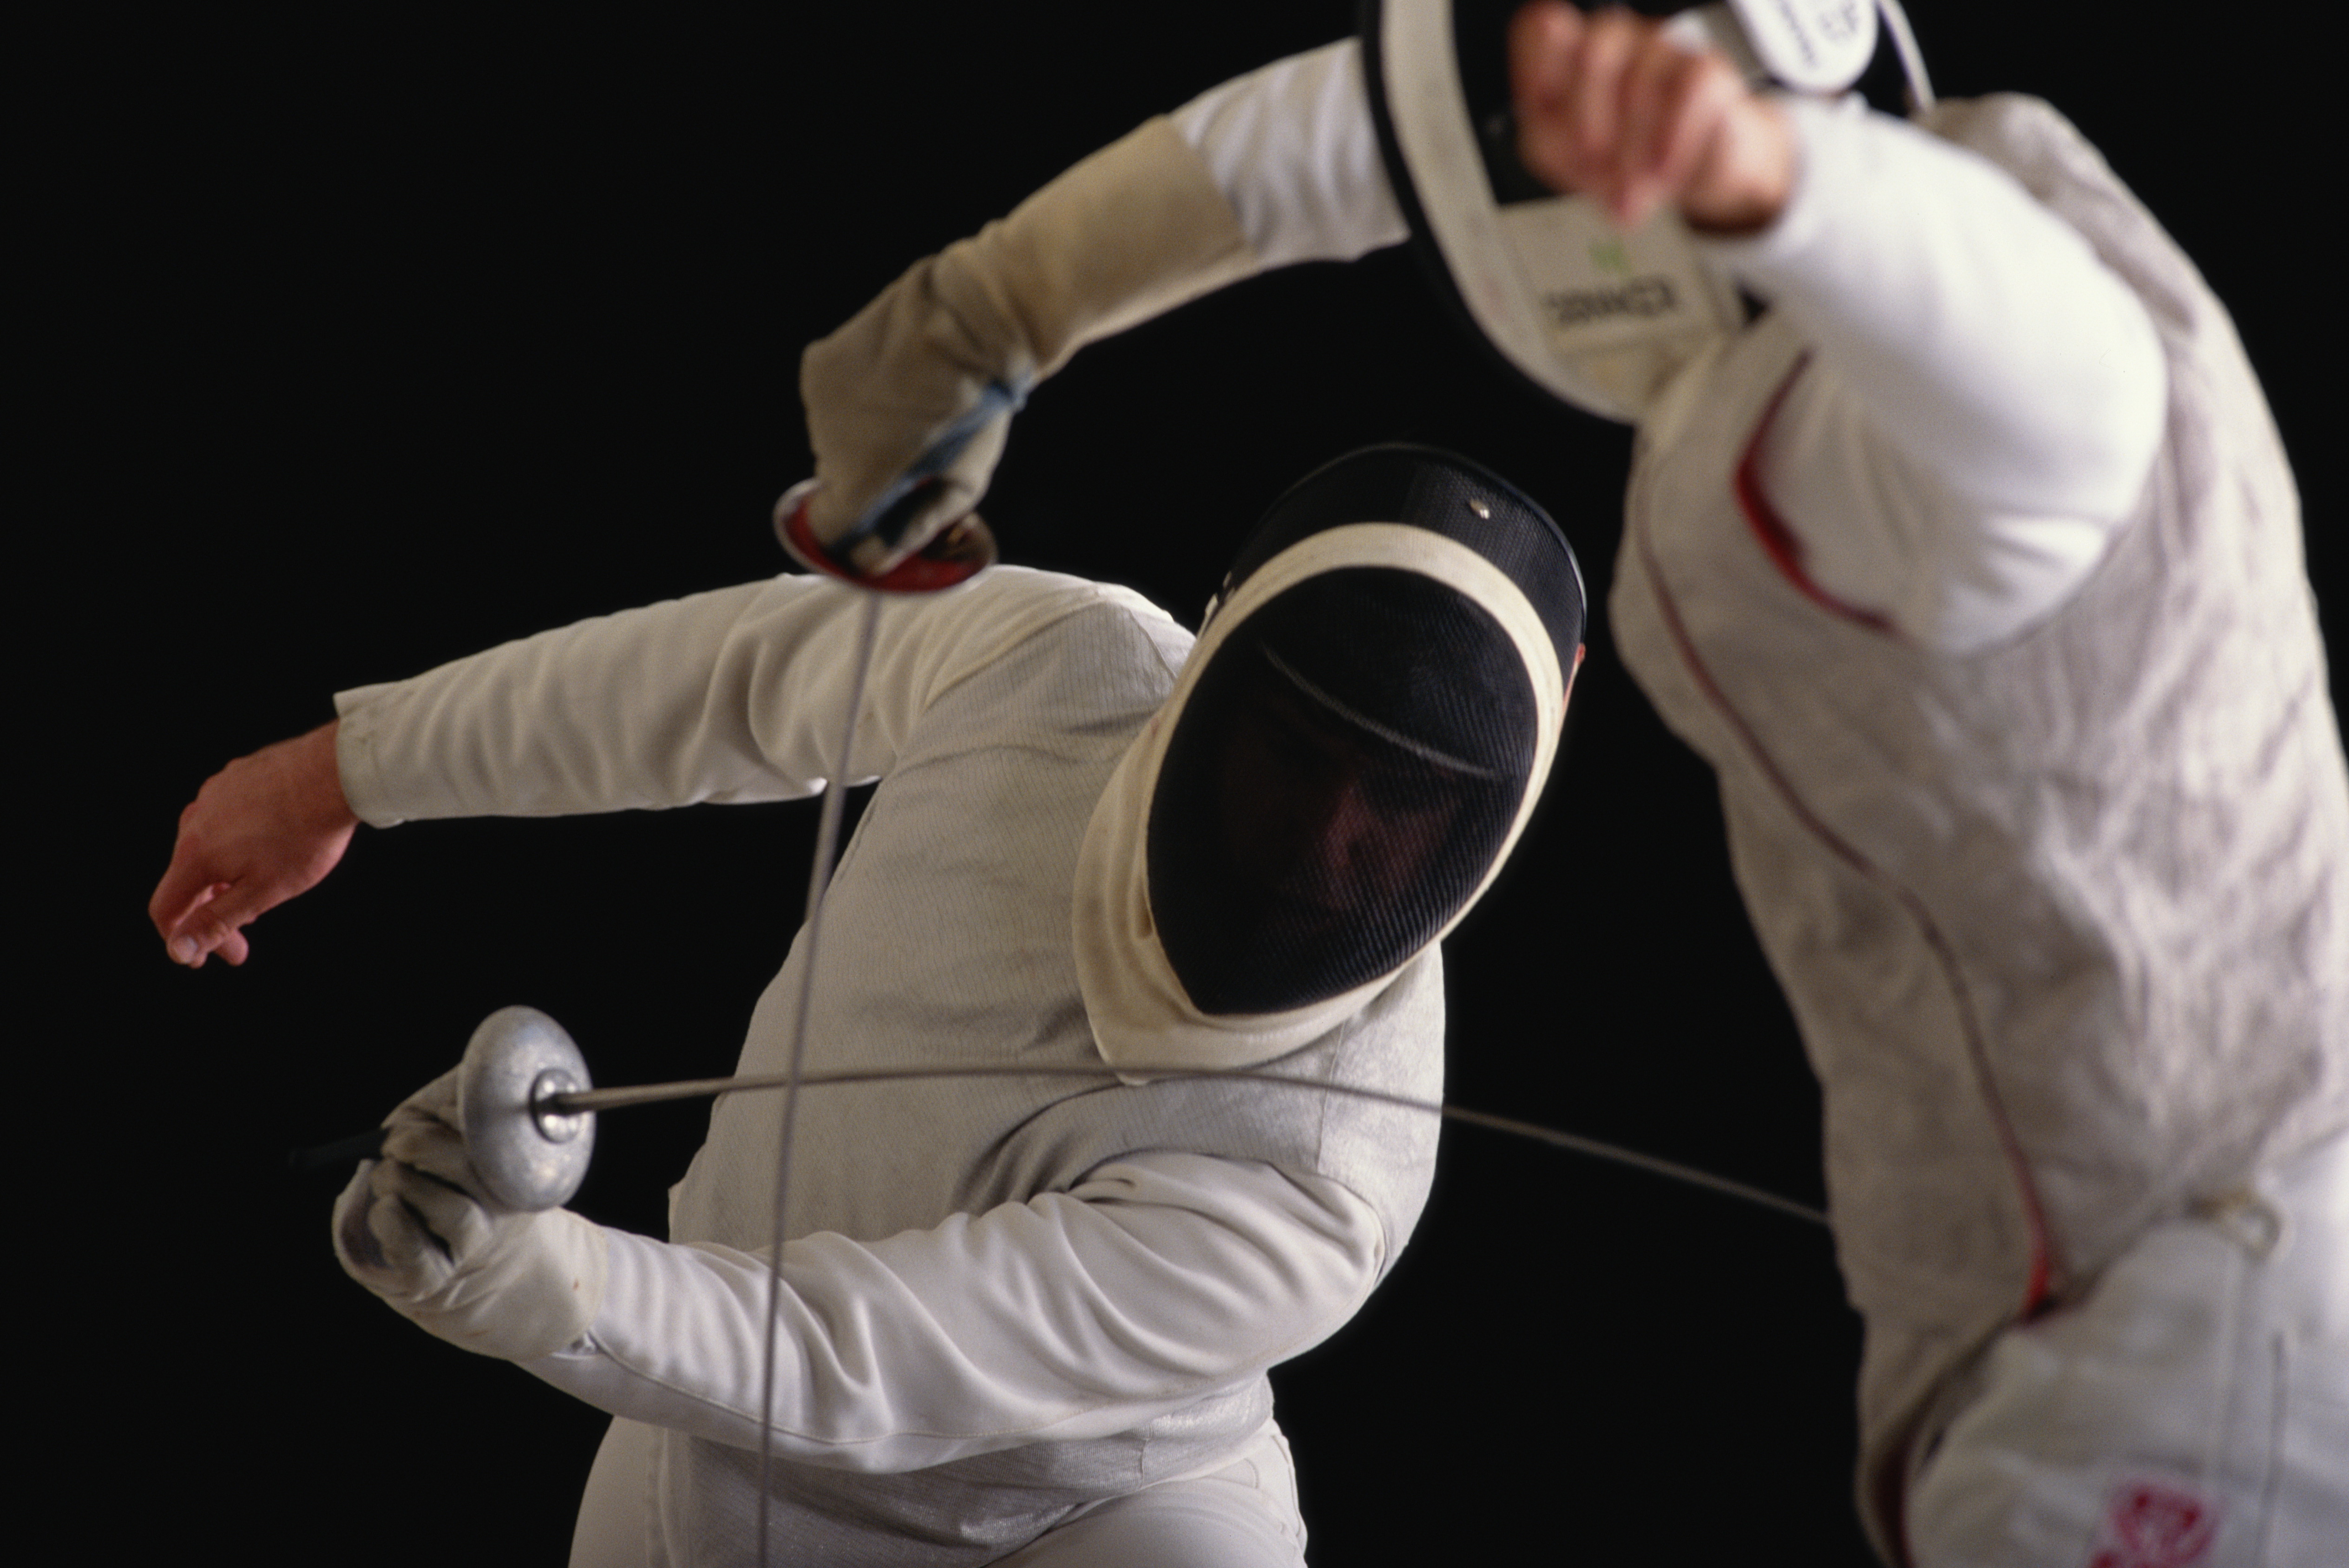 Fencing, competitors in action